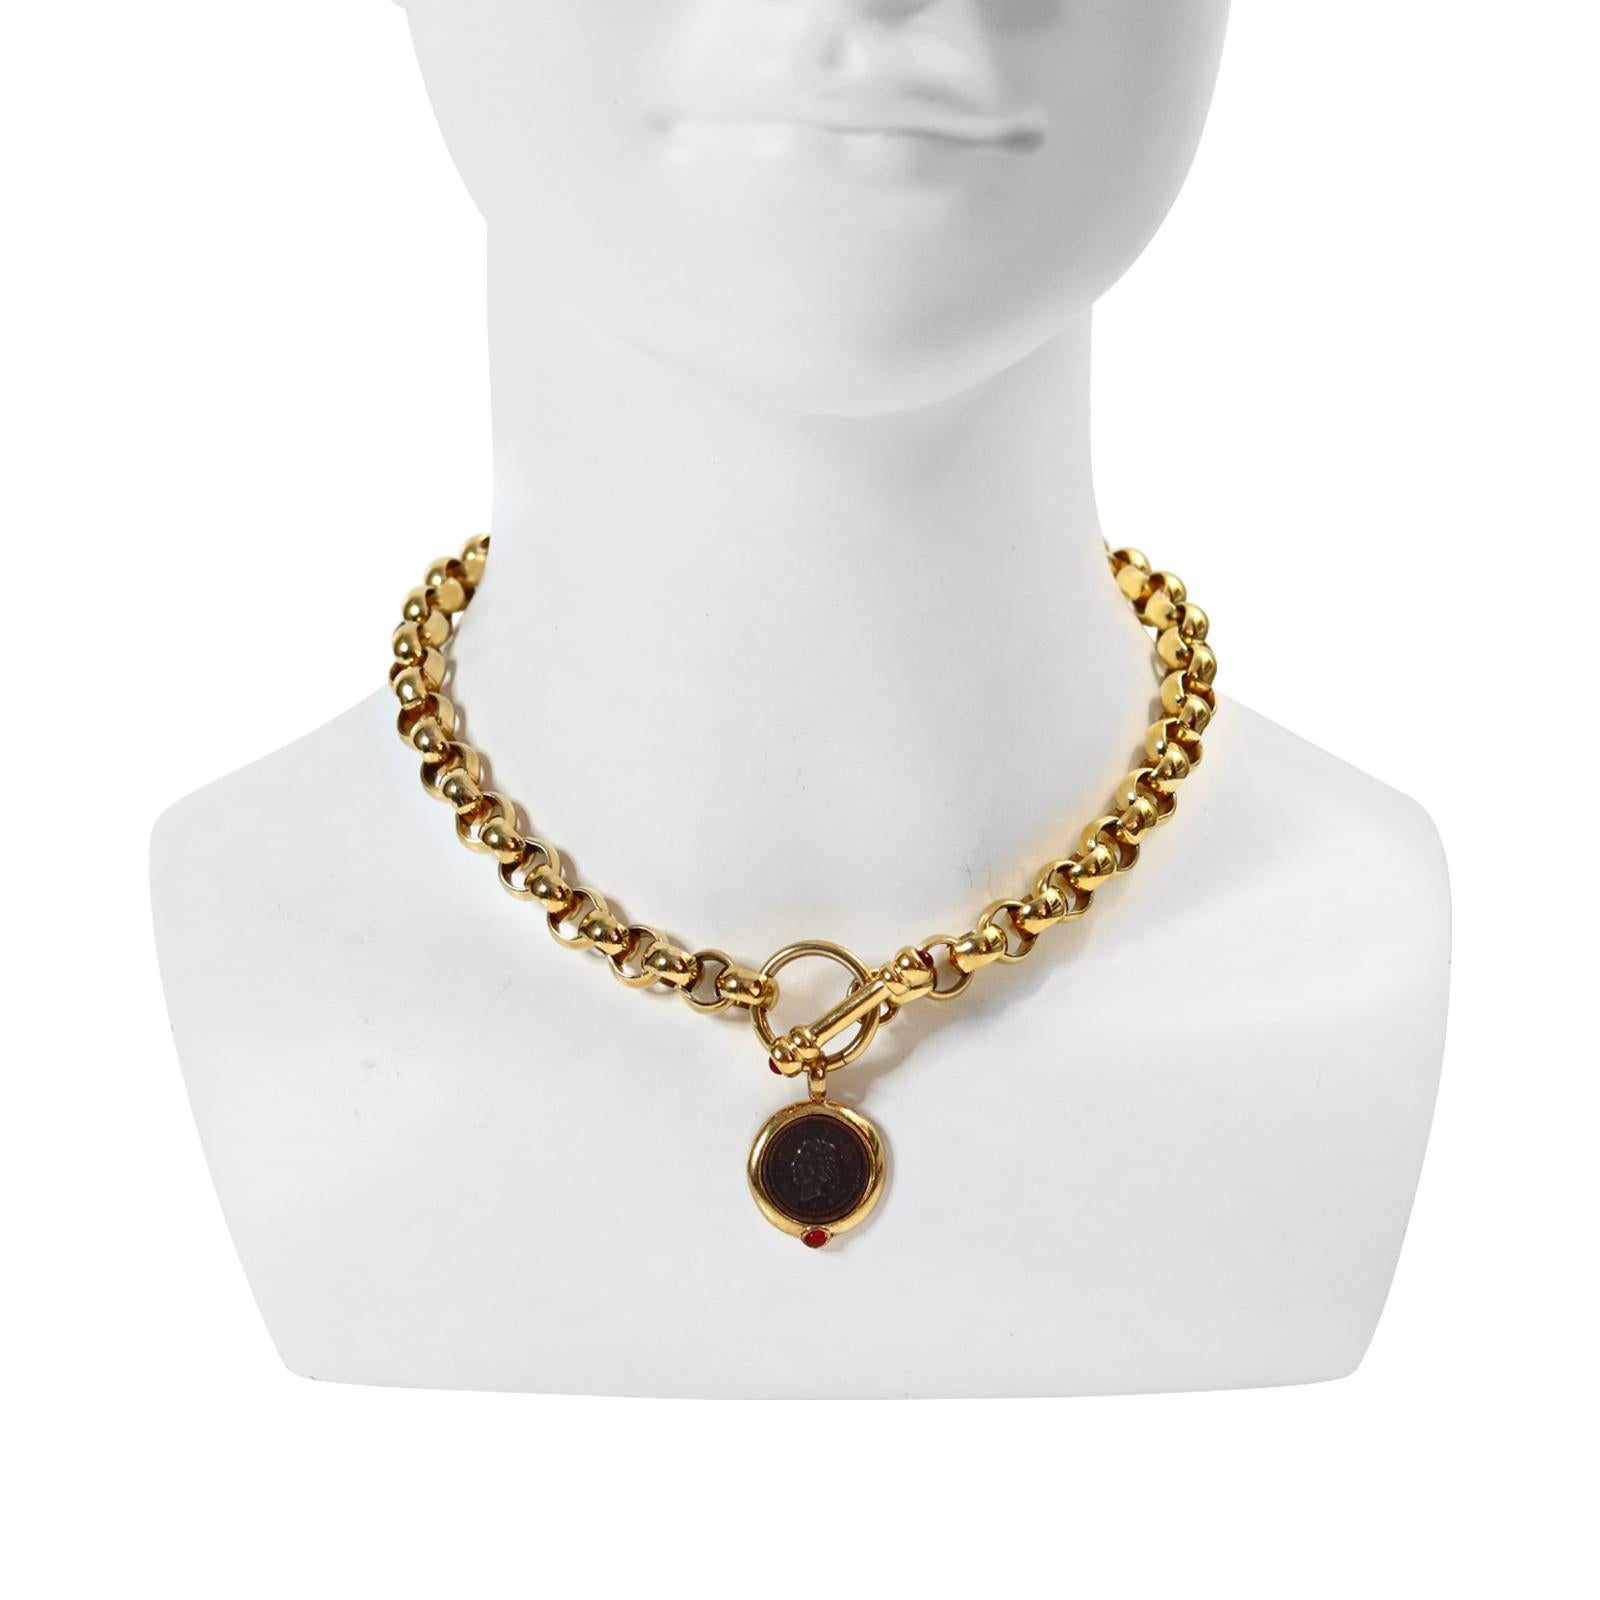 Modern Vintage Gold Rollo Chain with Toggle and Dangling Coin Necklace, circa 1990s For Sale